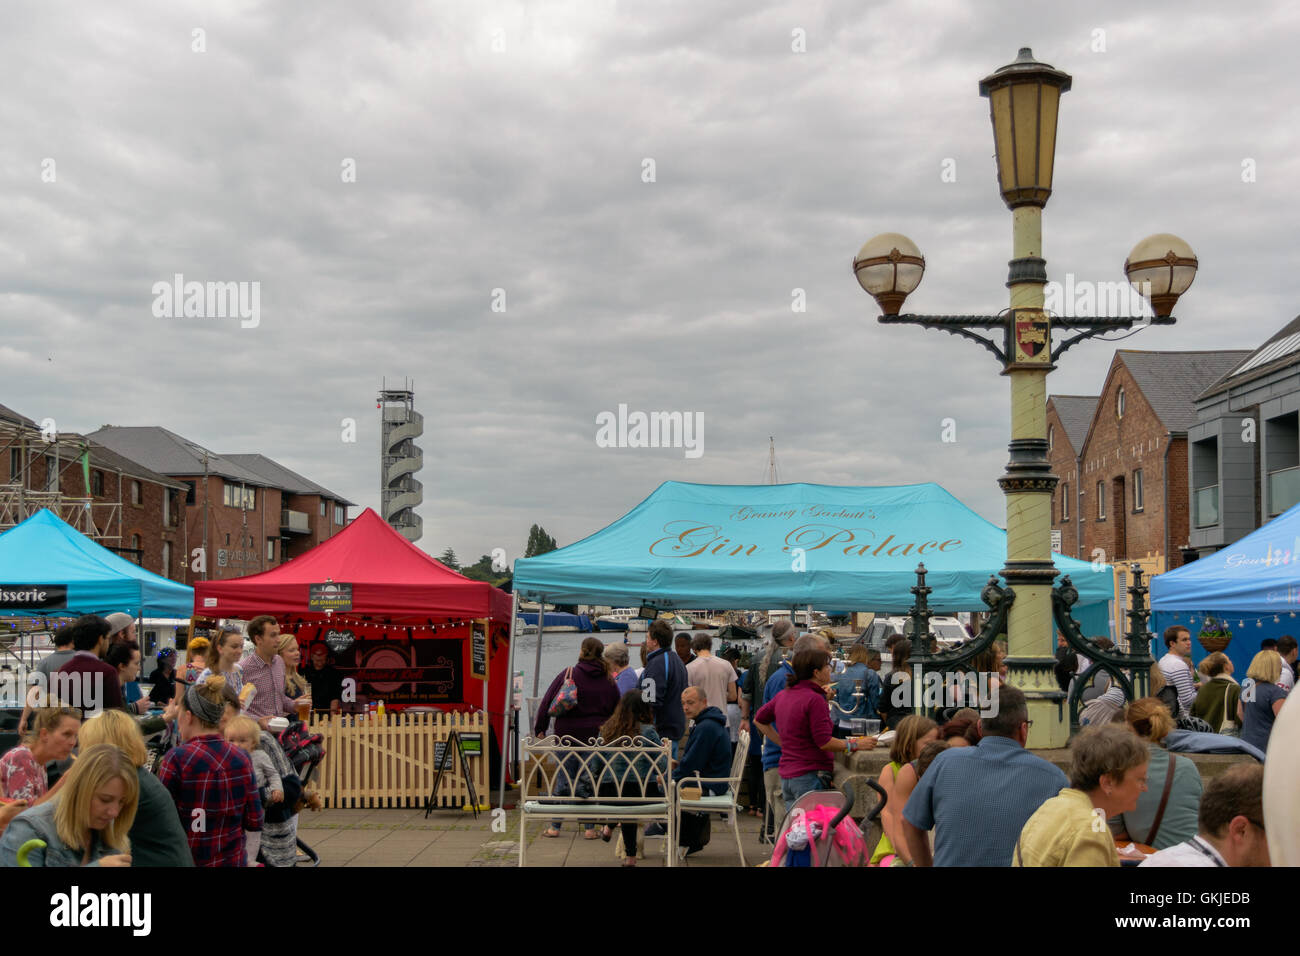 Exeter, Devon, United Kingdom - August 18, 2016: People eating and drinking at Exeter Street Food Night at the Piazza. Stock Photo